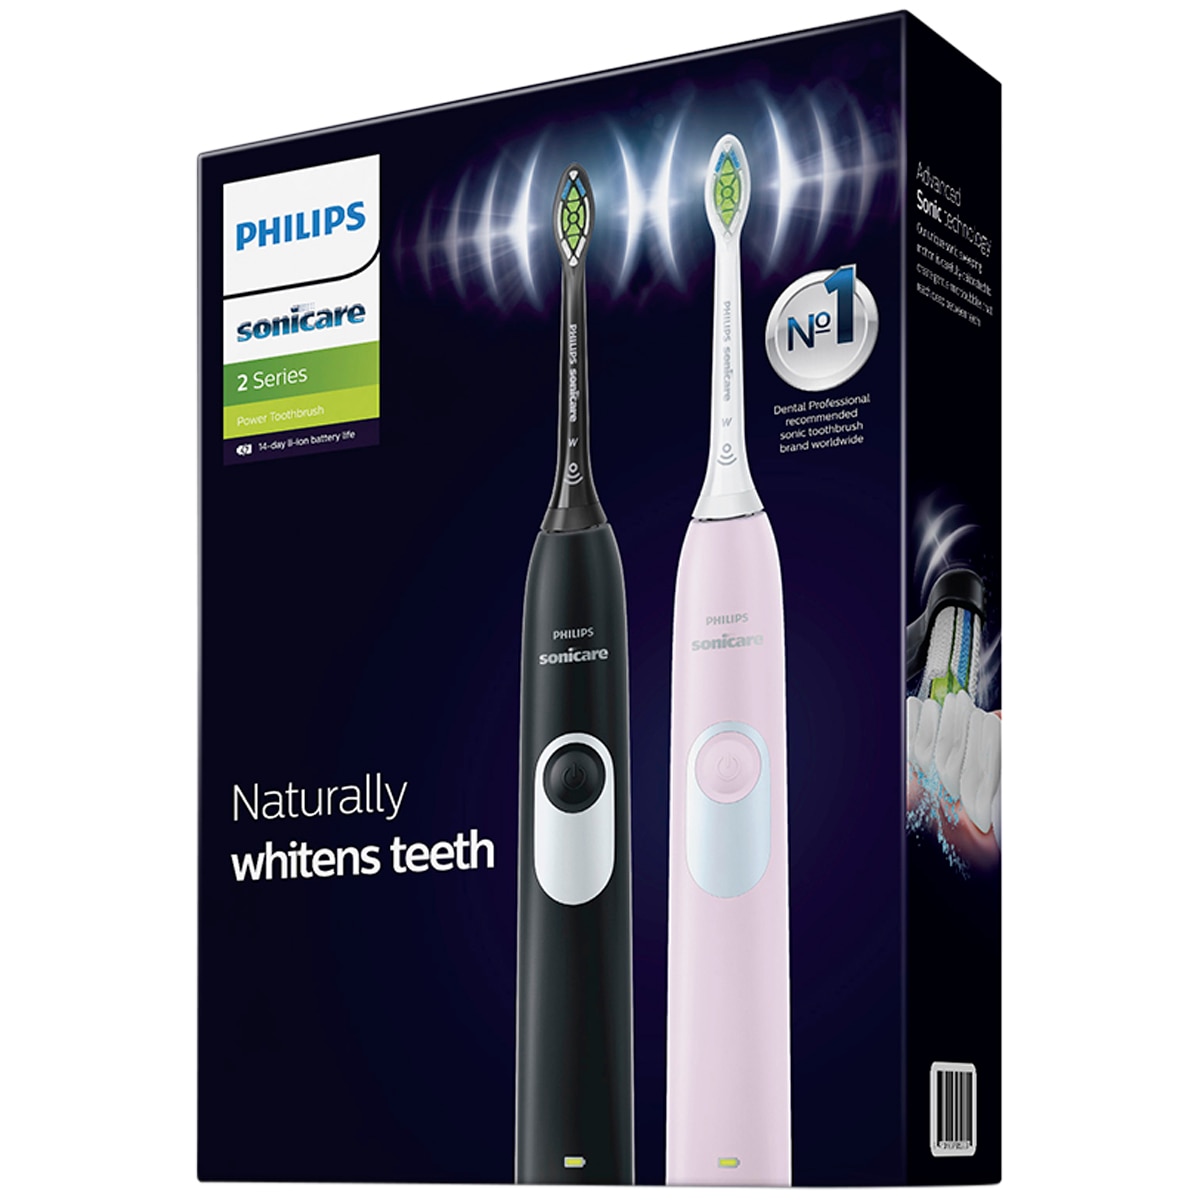 Philips Sonicare 2 Series Electric Toothbrush 2pk HX6232/77